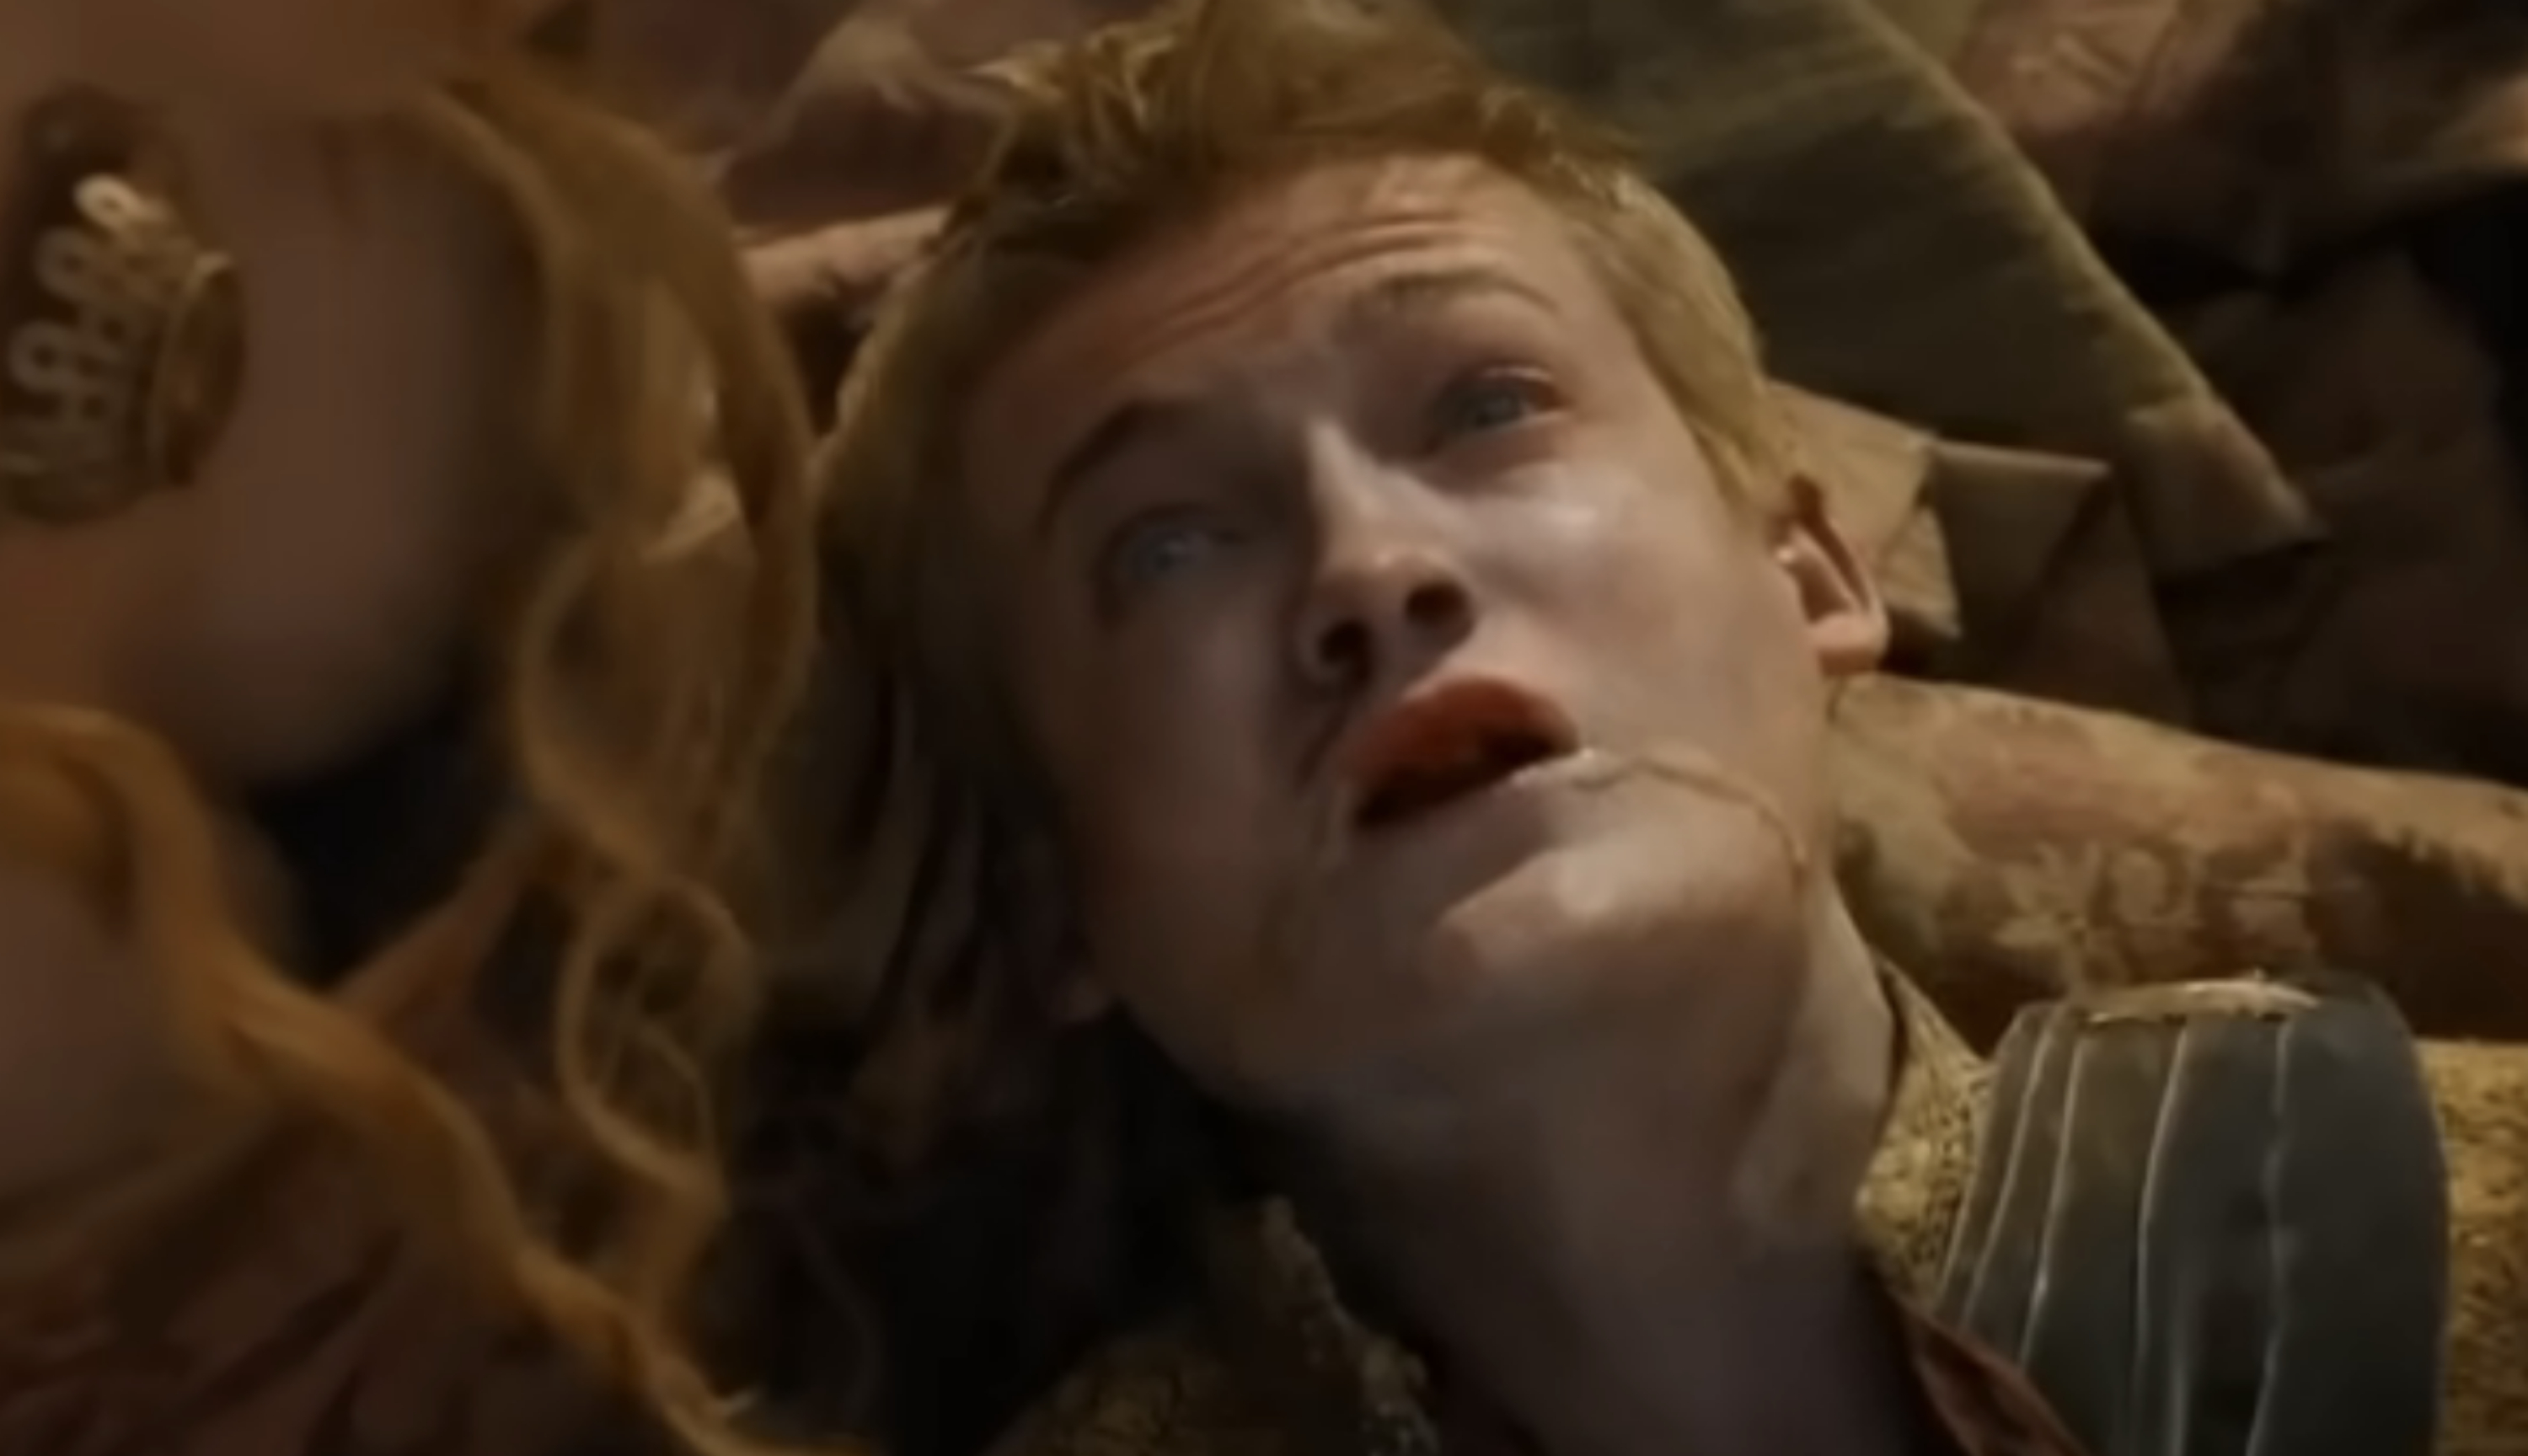 Character Joffrey Baratheon from Game of Thrones appears distressed during a pivotal scene